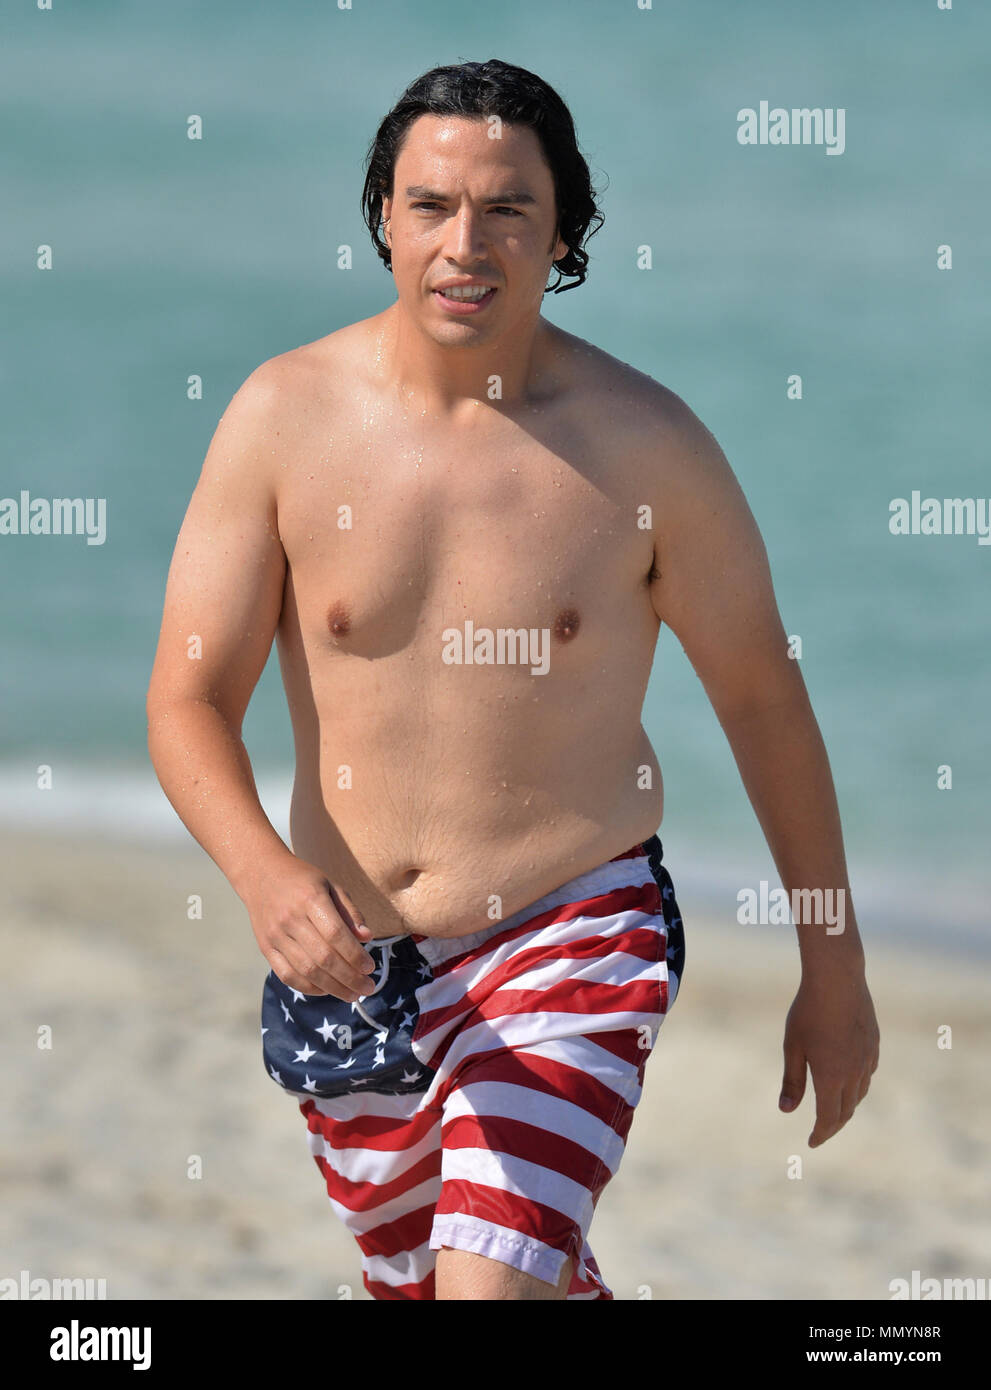 MIAMI BEACH, FL - MAY 14: Actor Jon Bass goes for a swim wearing American  Flag bathing suit at his South Beach Hotel on Mother's Day on May 14, 2017  in Miami